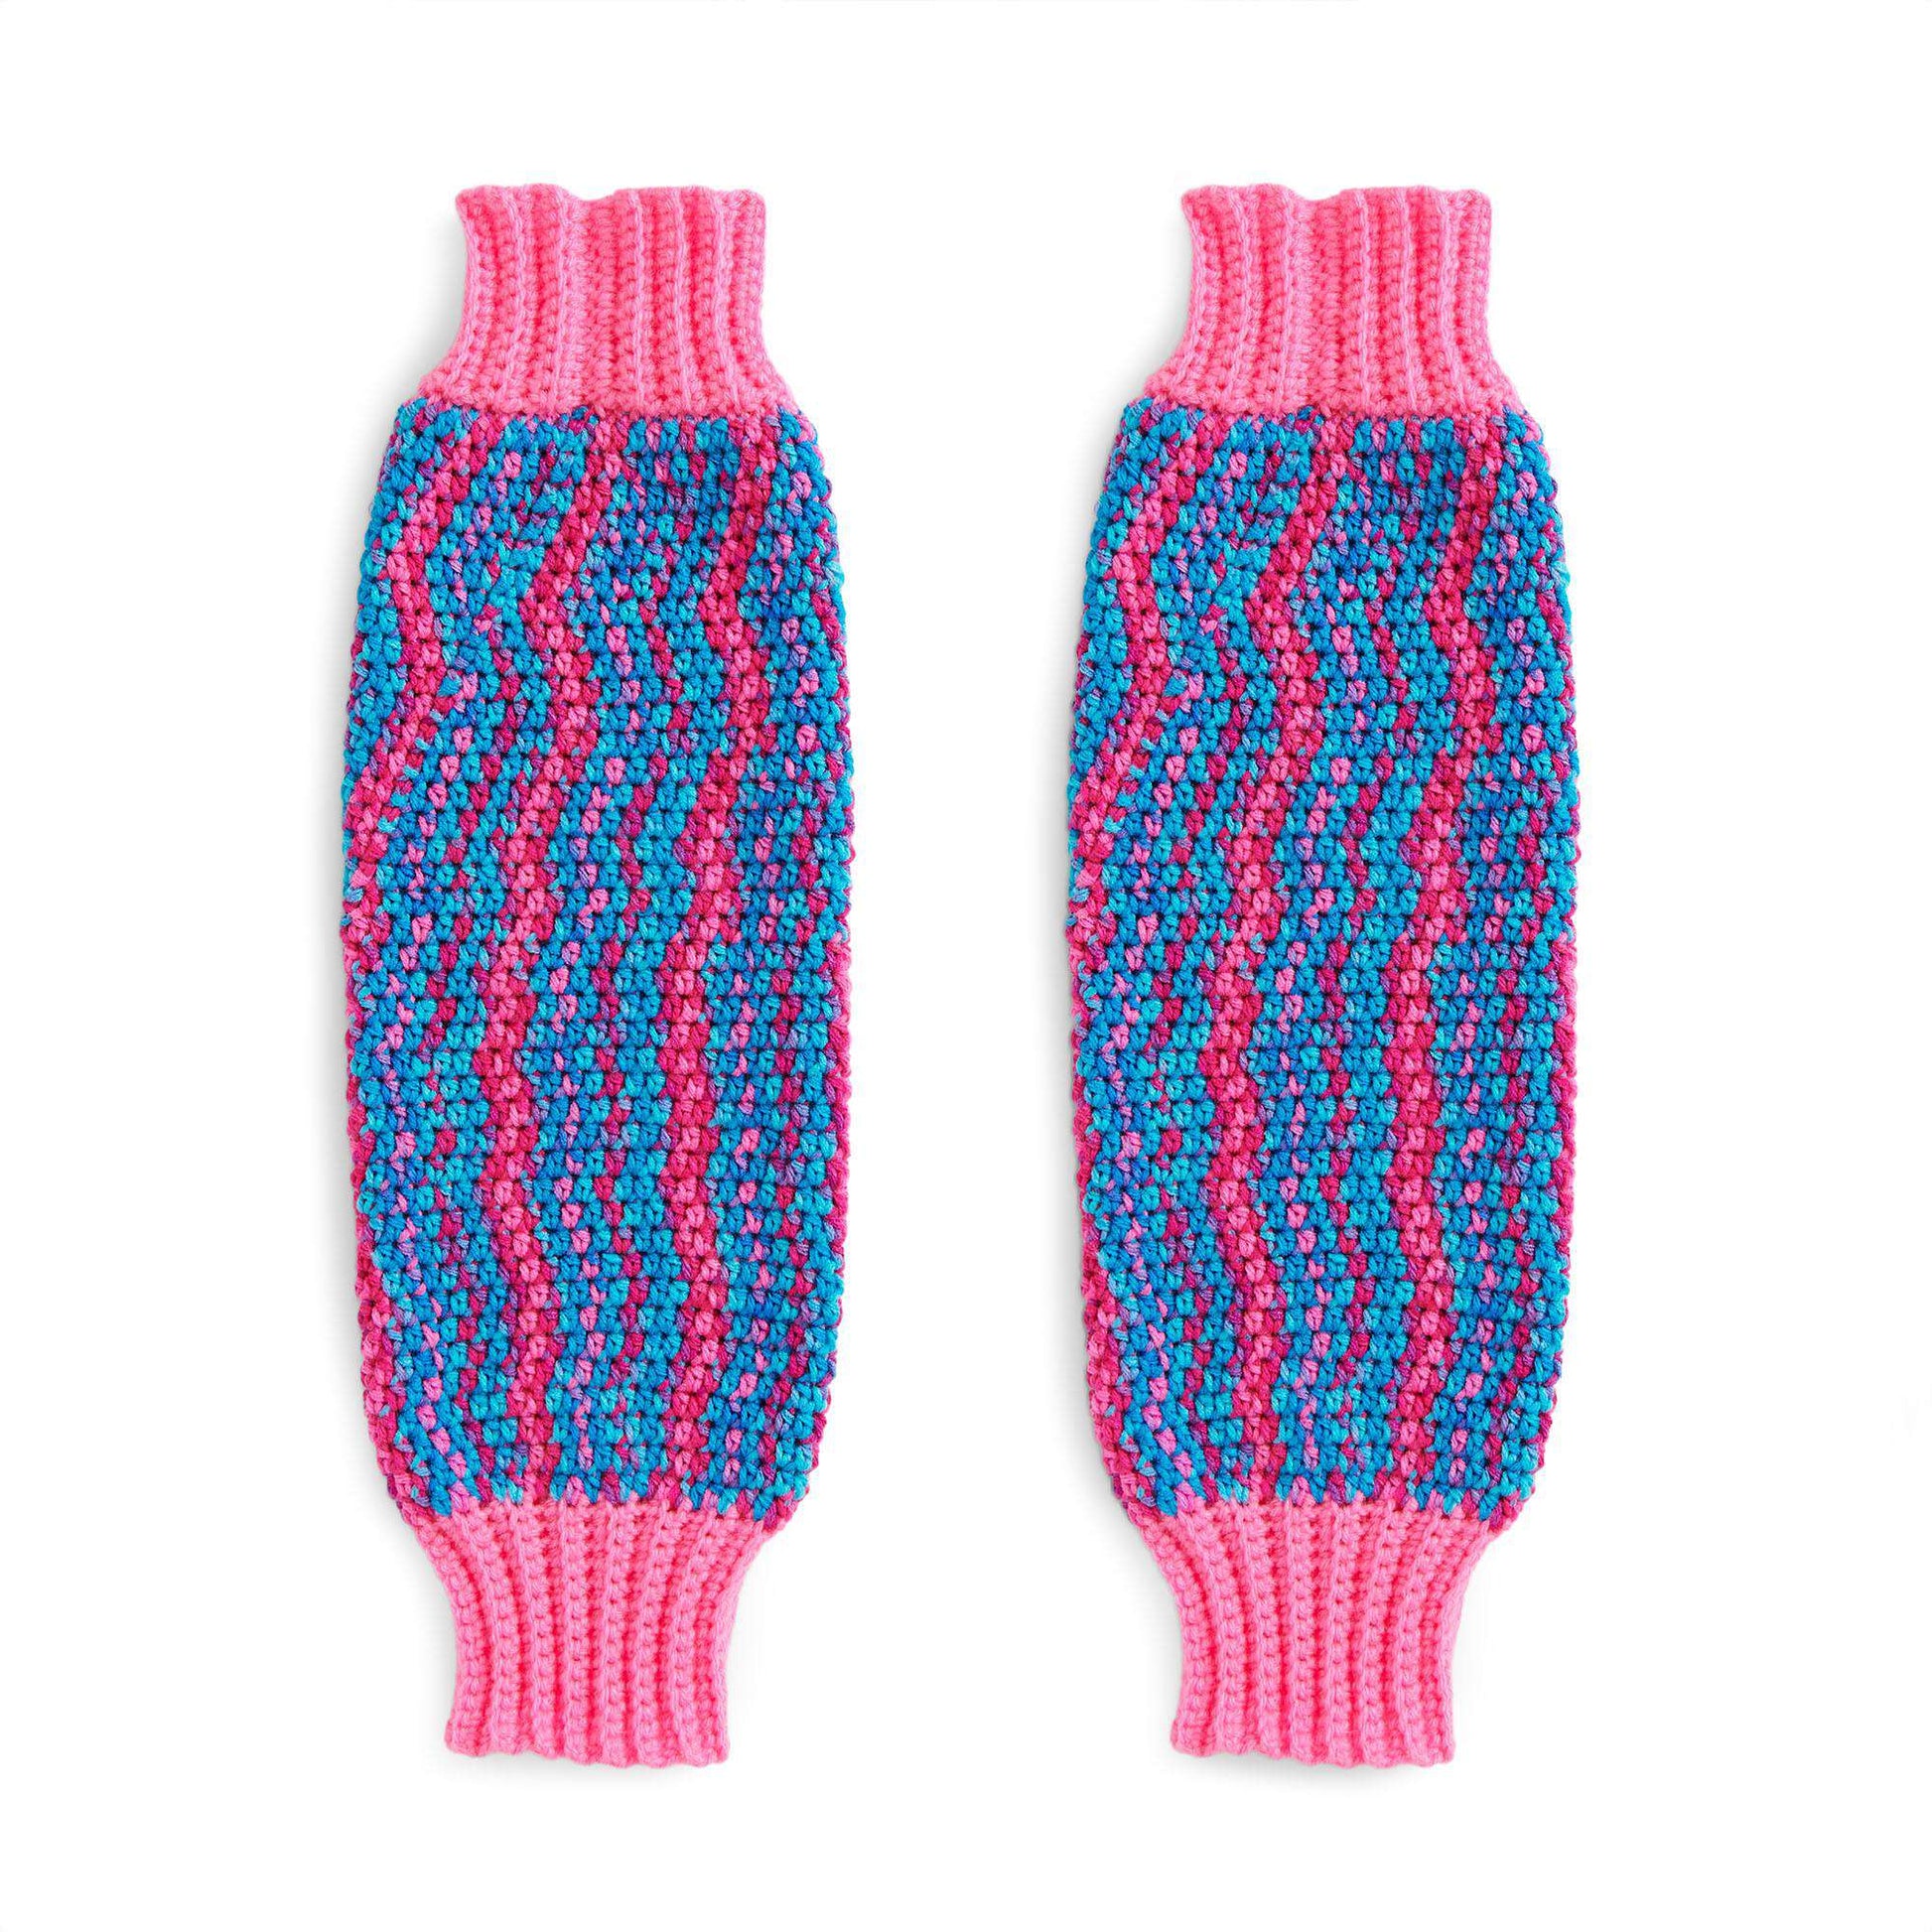 Ads-Free Three-Color Baby Knit Leg Warmers Pattern